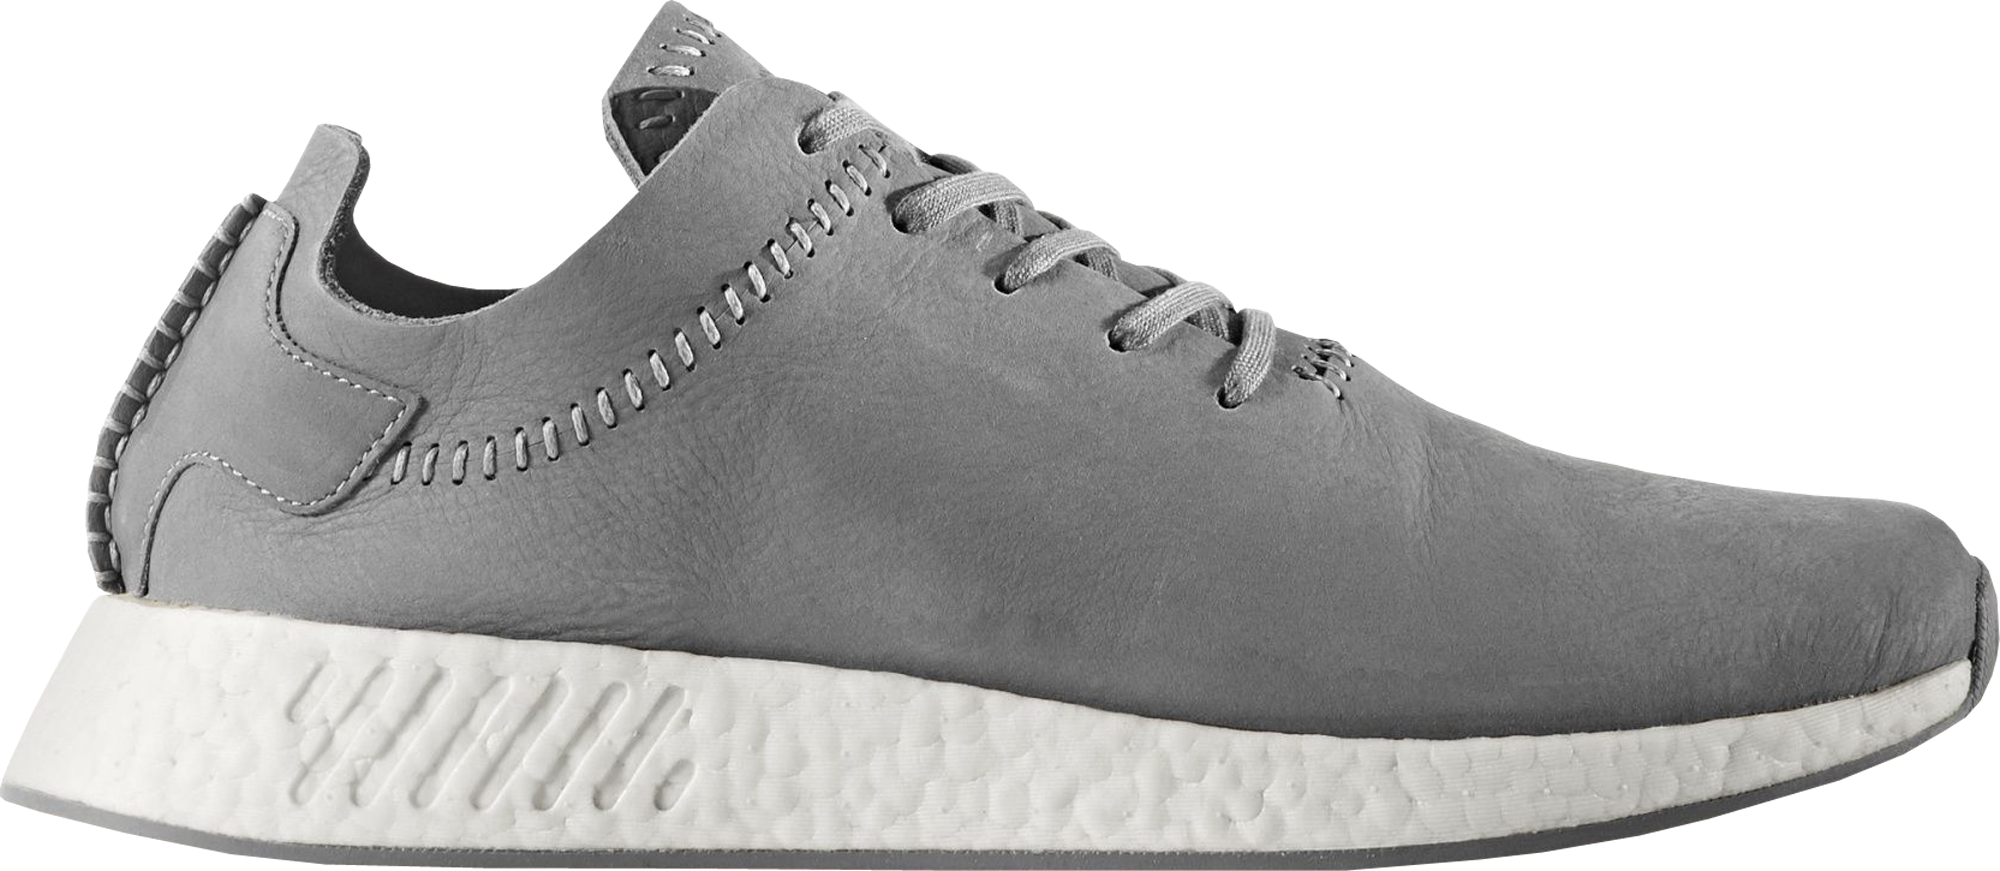 adidas NMD R2 Wings and Horns Ash - BB3117